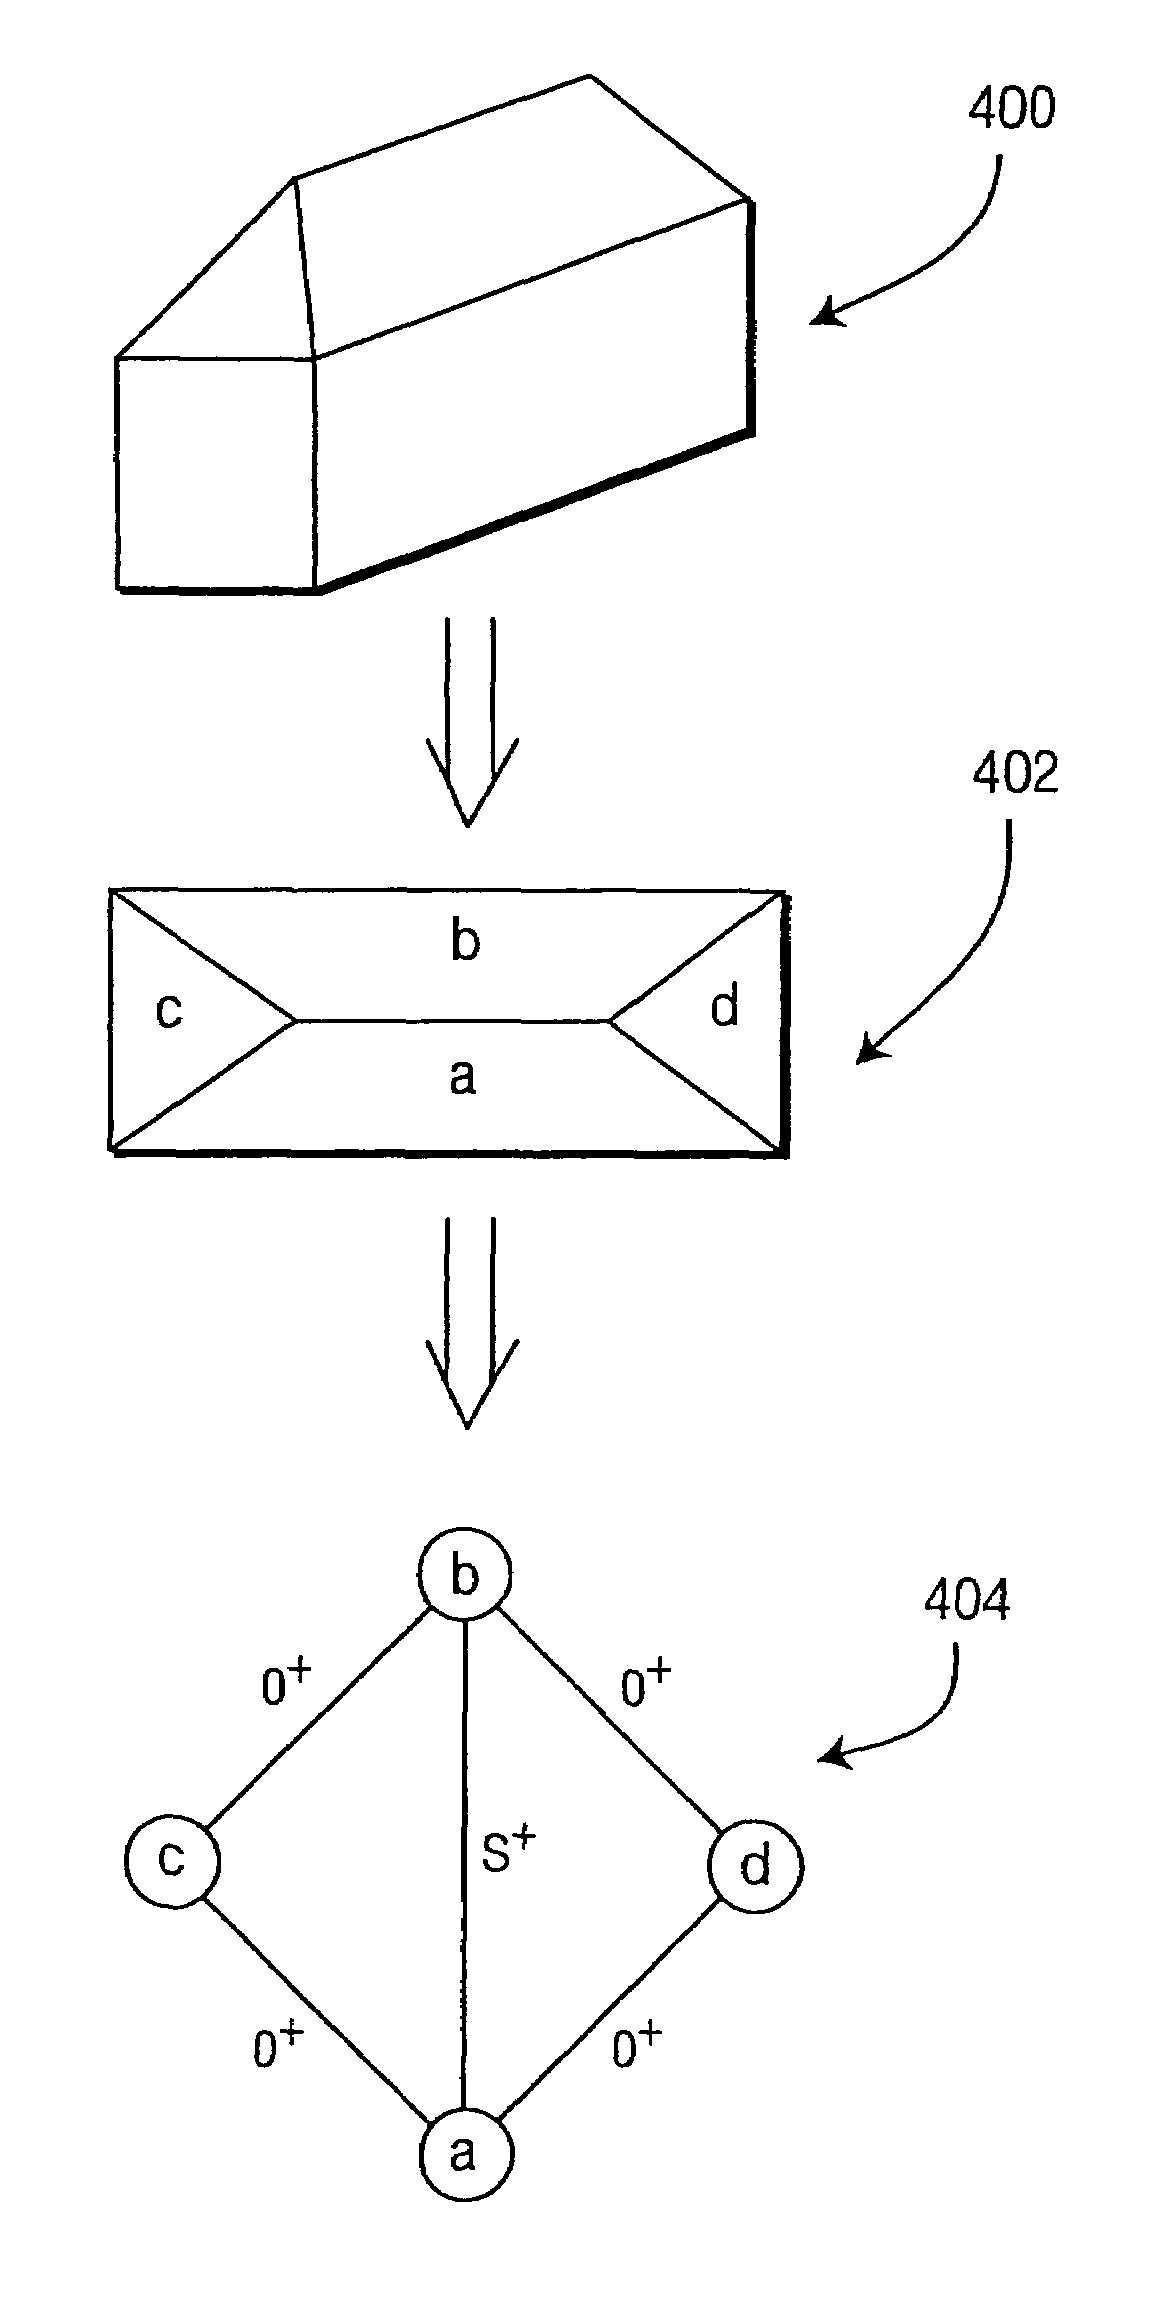 Method for generating a three-dimensional model of a roof structure